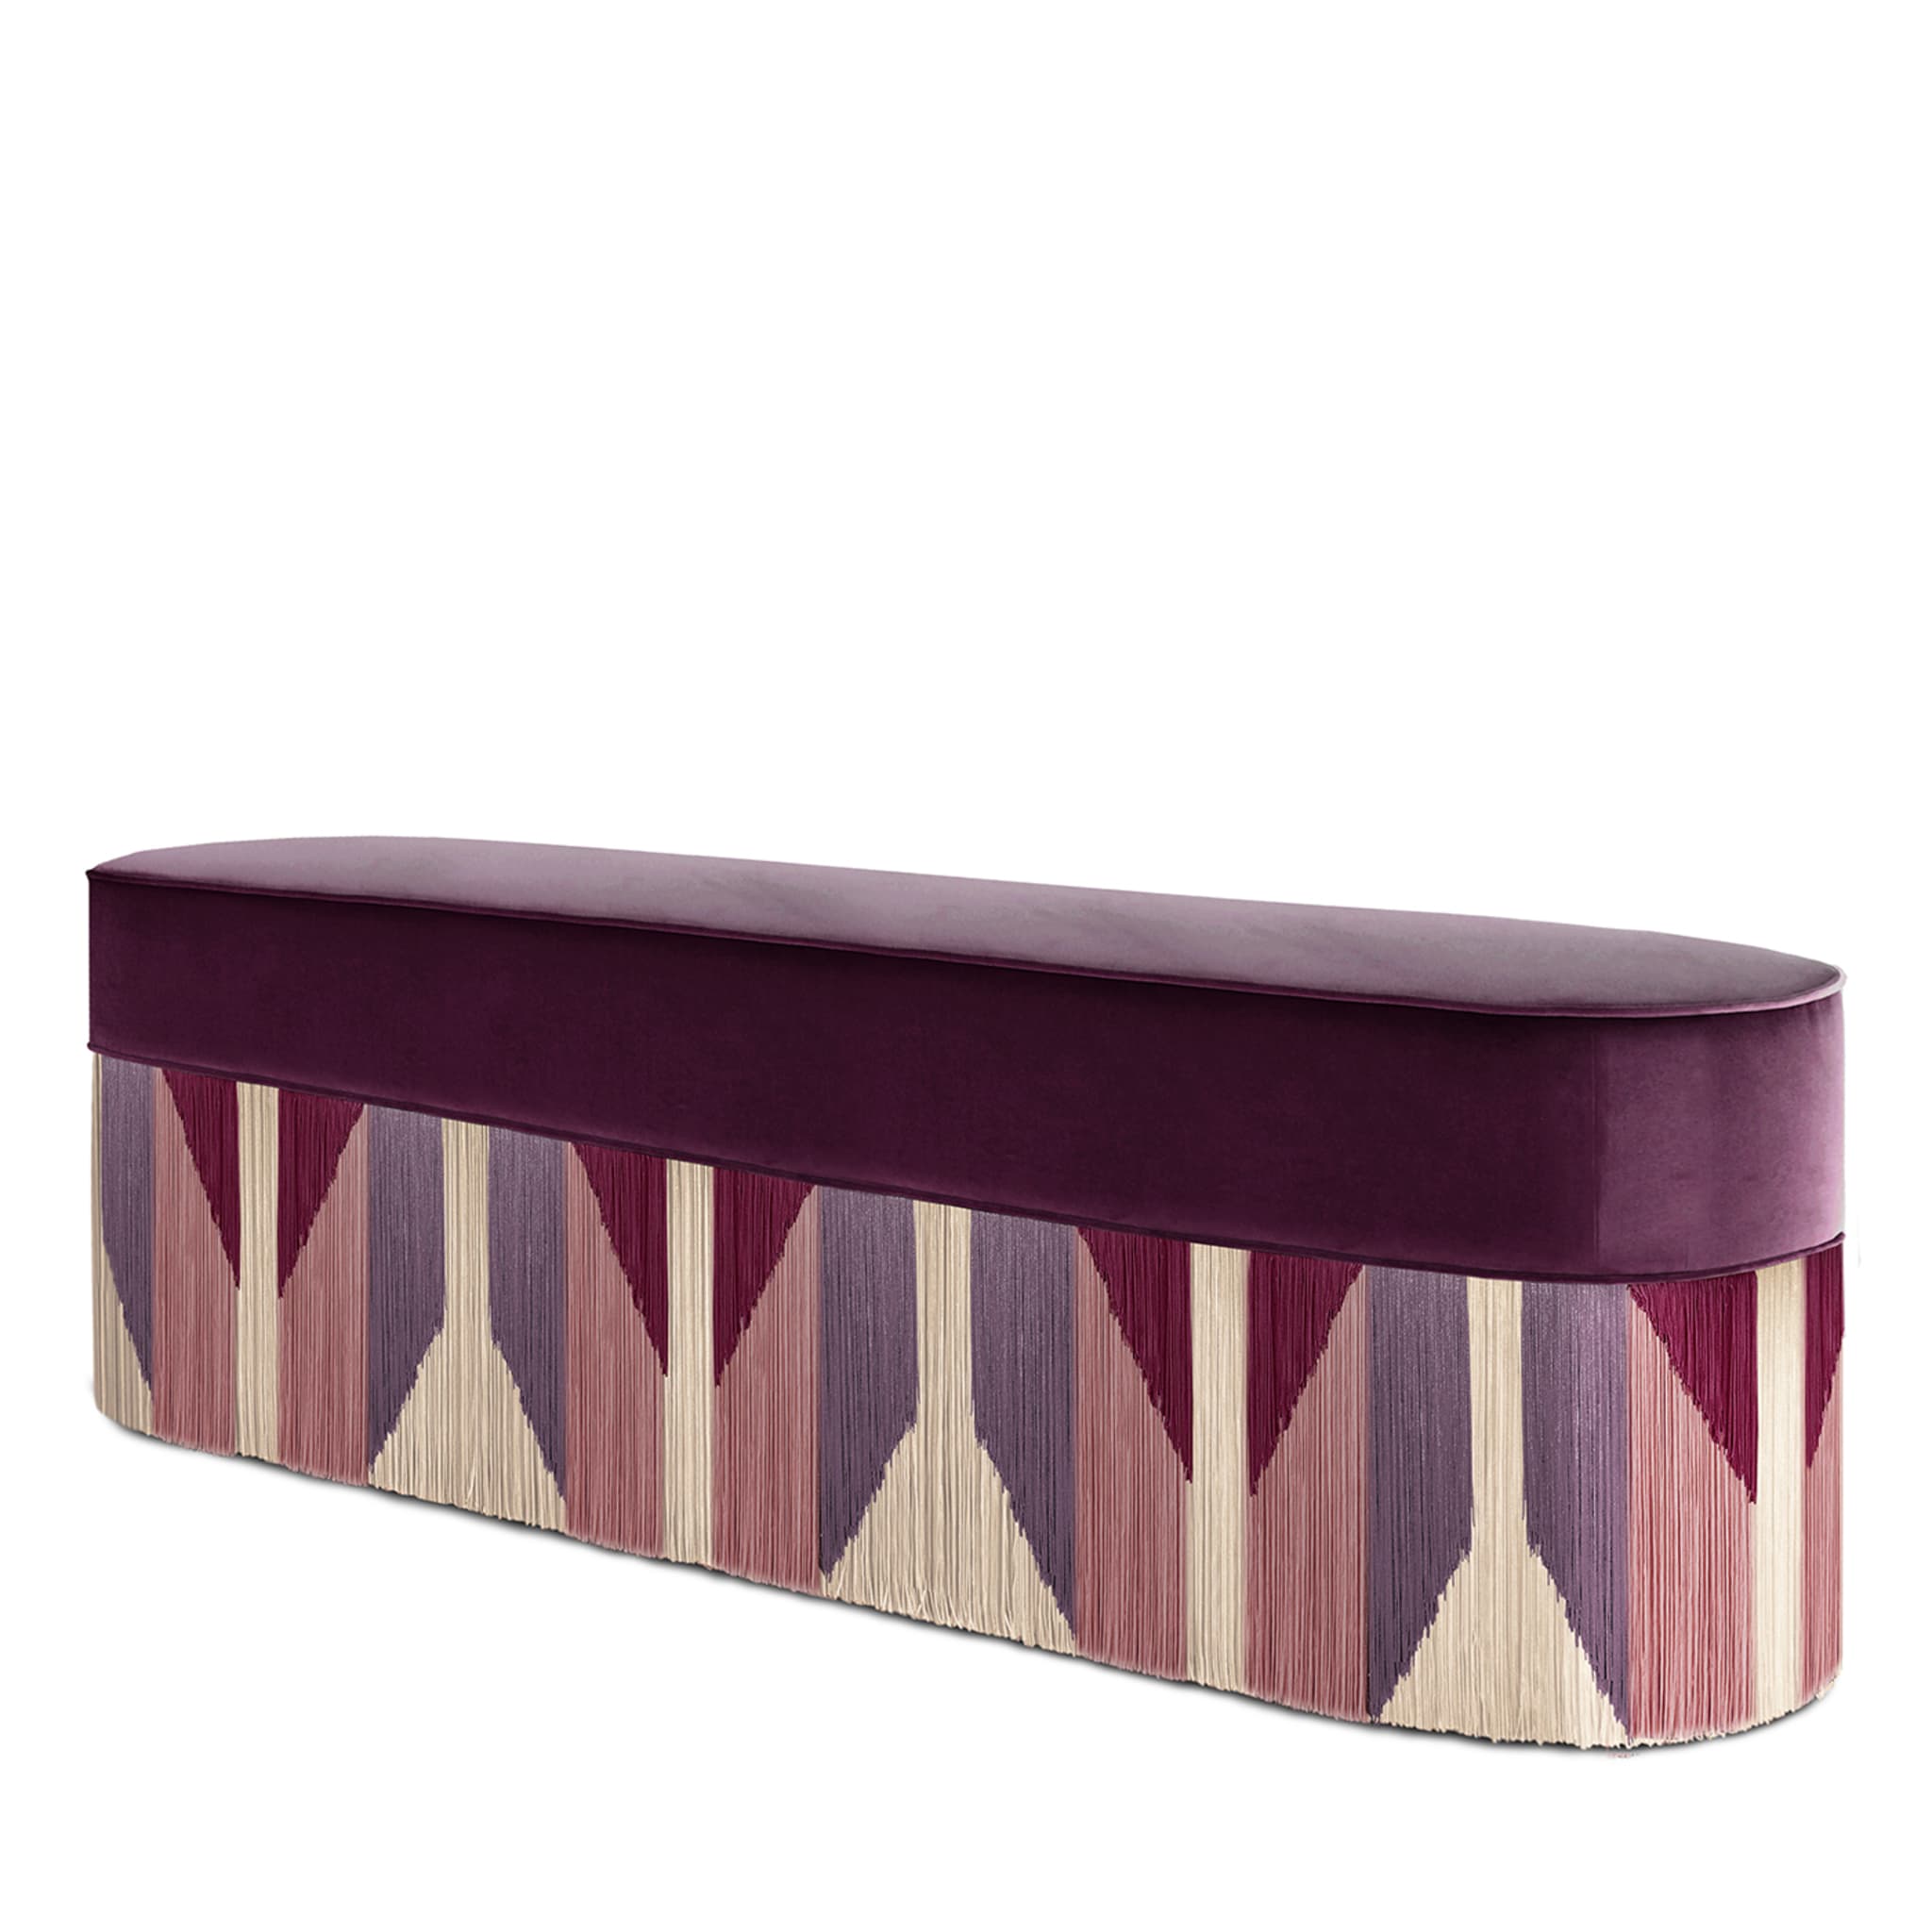 Couture Tribe Polychrome Bench #2 - Alternative view 2